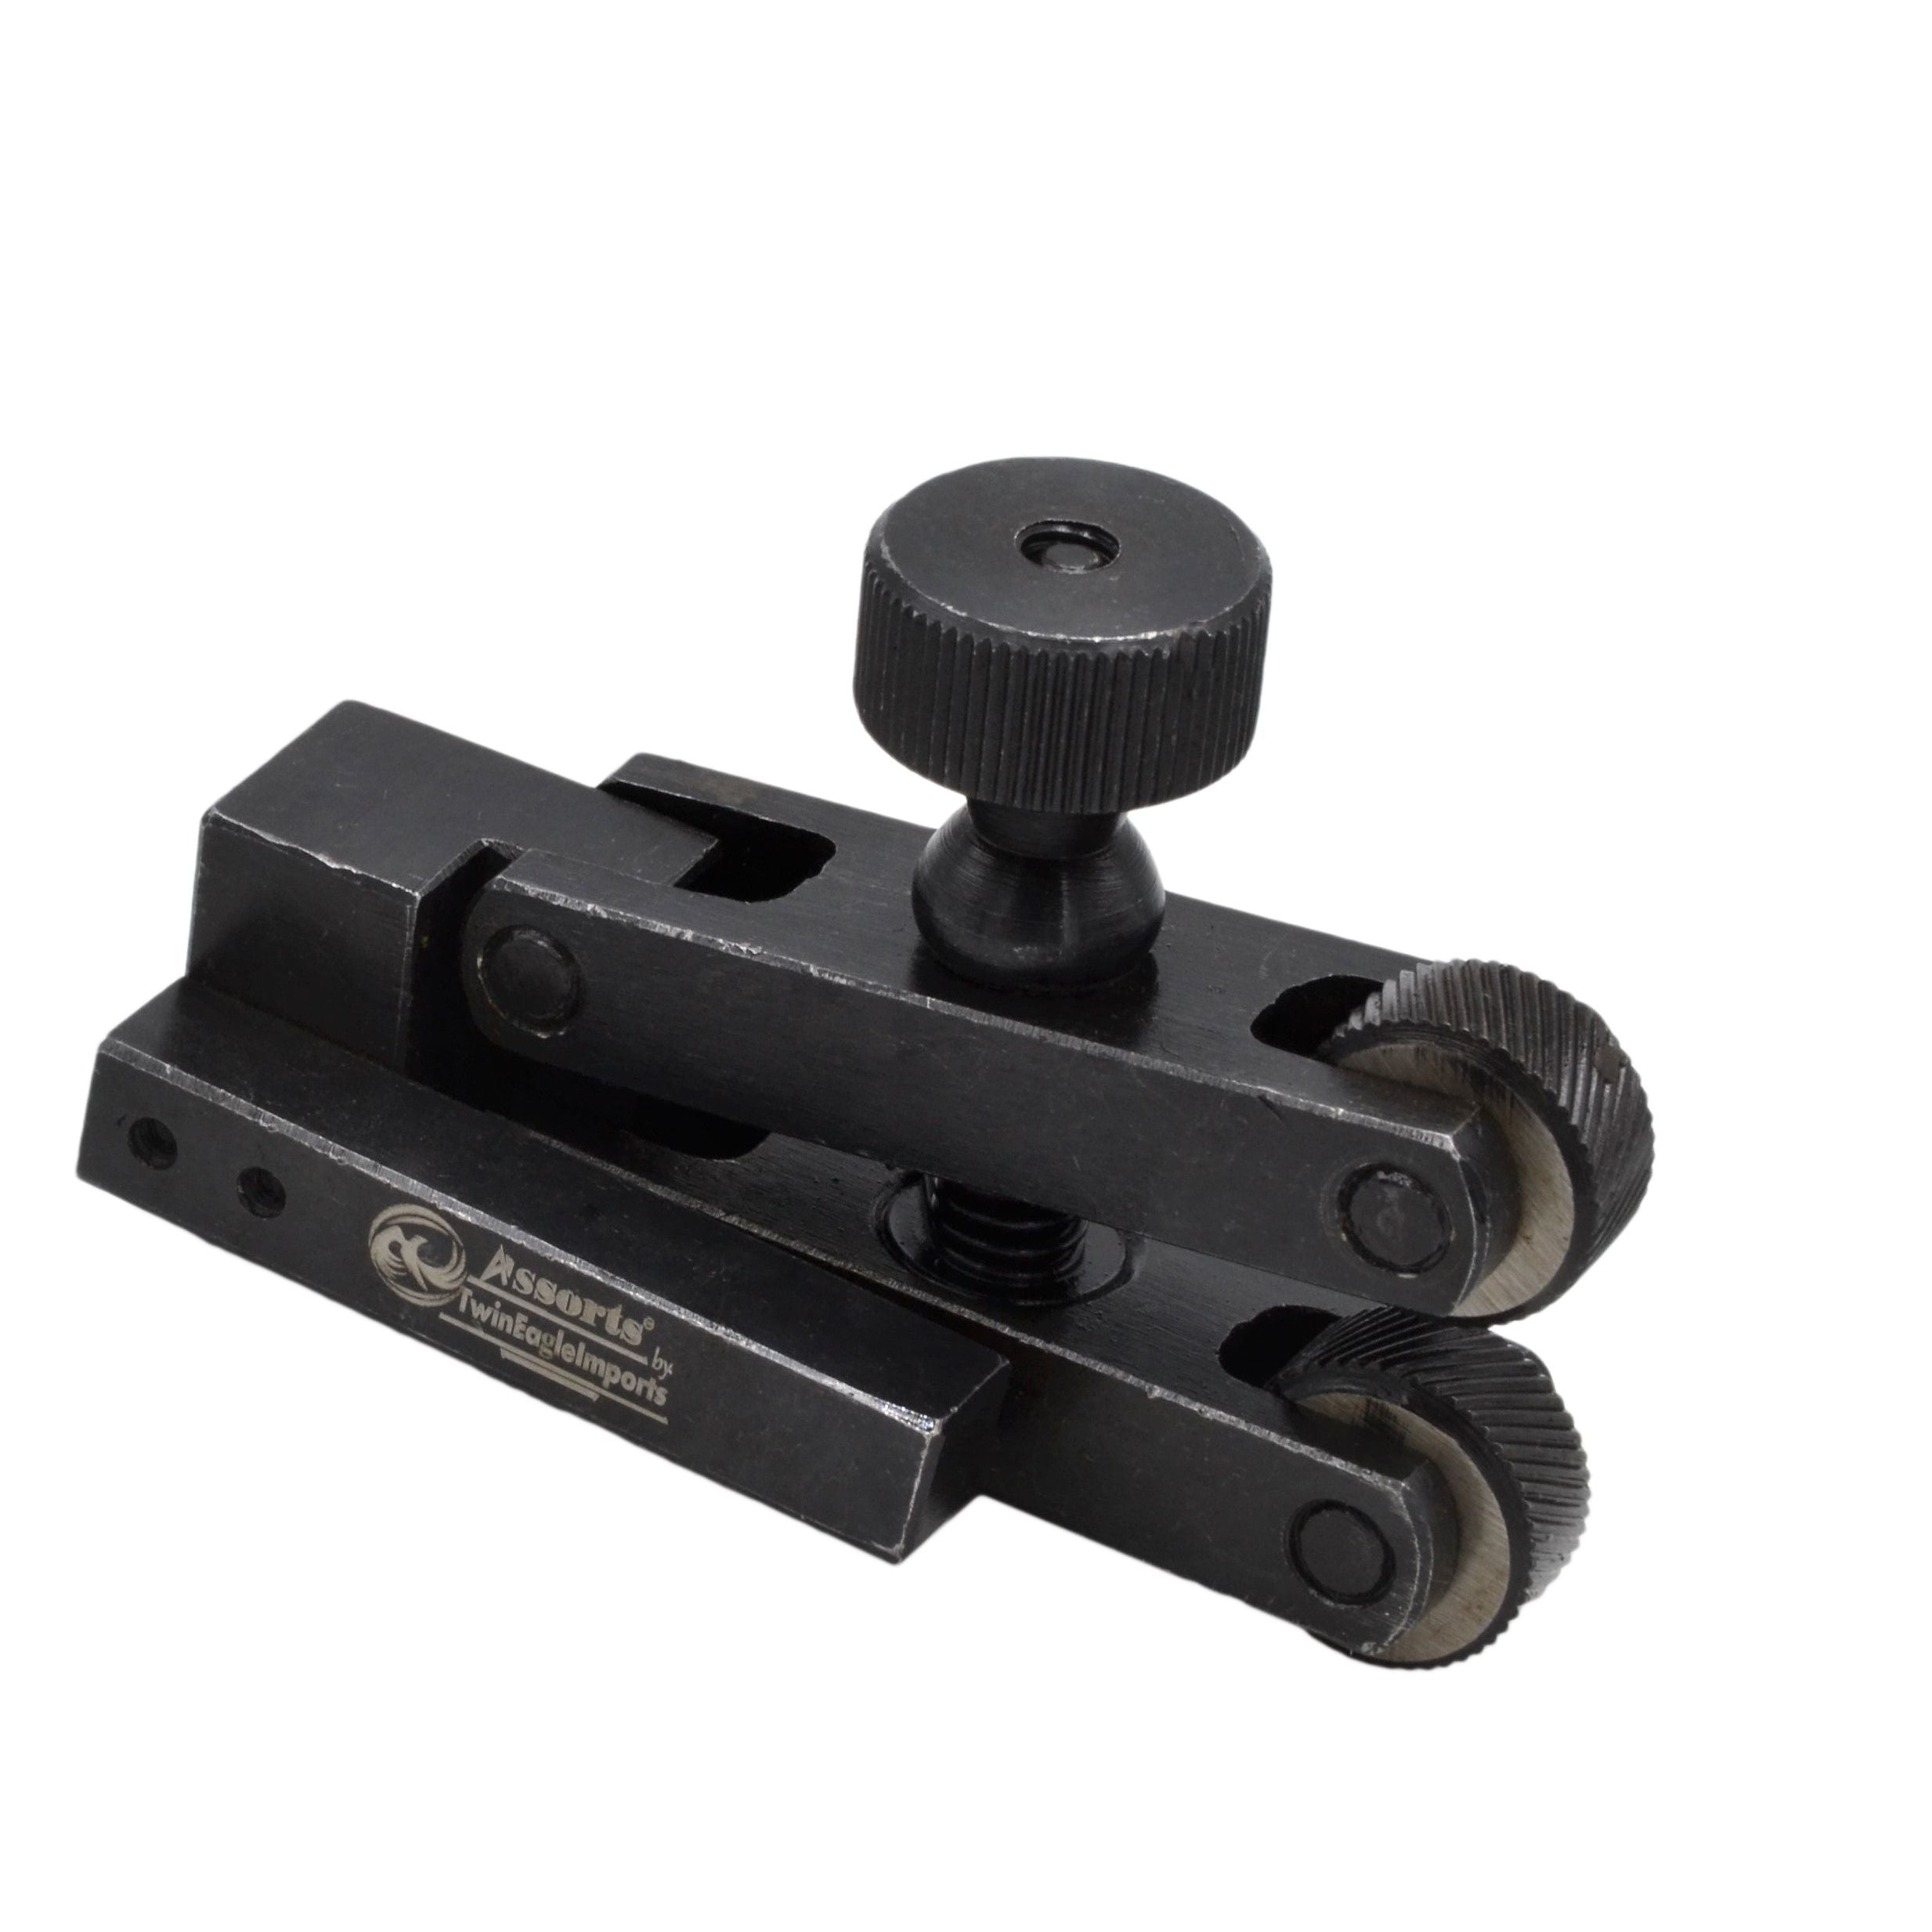 Spring Loaded V Clamp Type 5-20 mm Knurling Tool 10 mm Mount